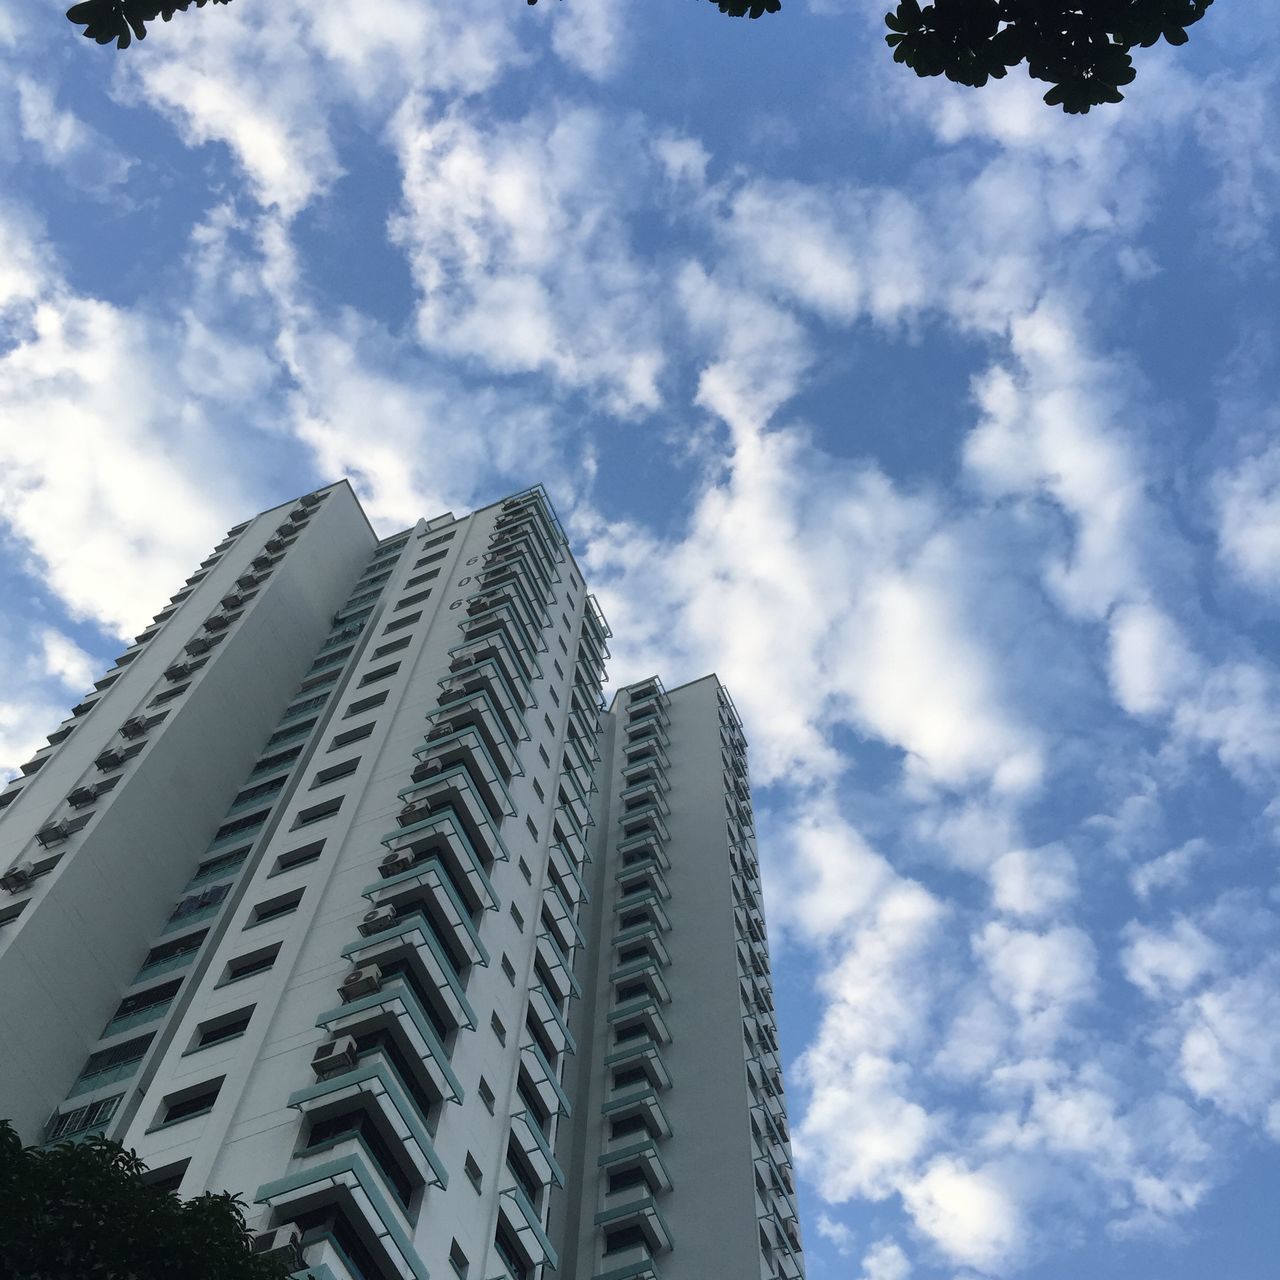 low angle view, sky, architecture, built structure, building exterior, cloud - sky, cloud, cloudy, pattern, famous place, day, outdoors, travel destinations, repetition, no people, architectural feature, modern, in a row, tall - high, city